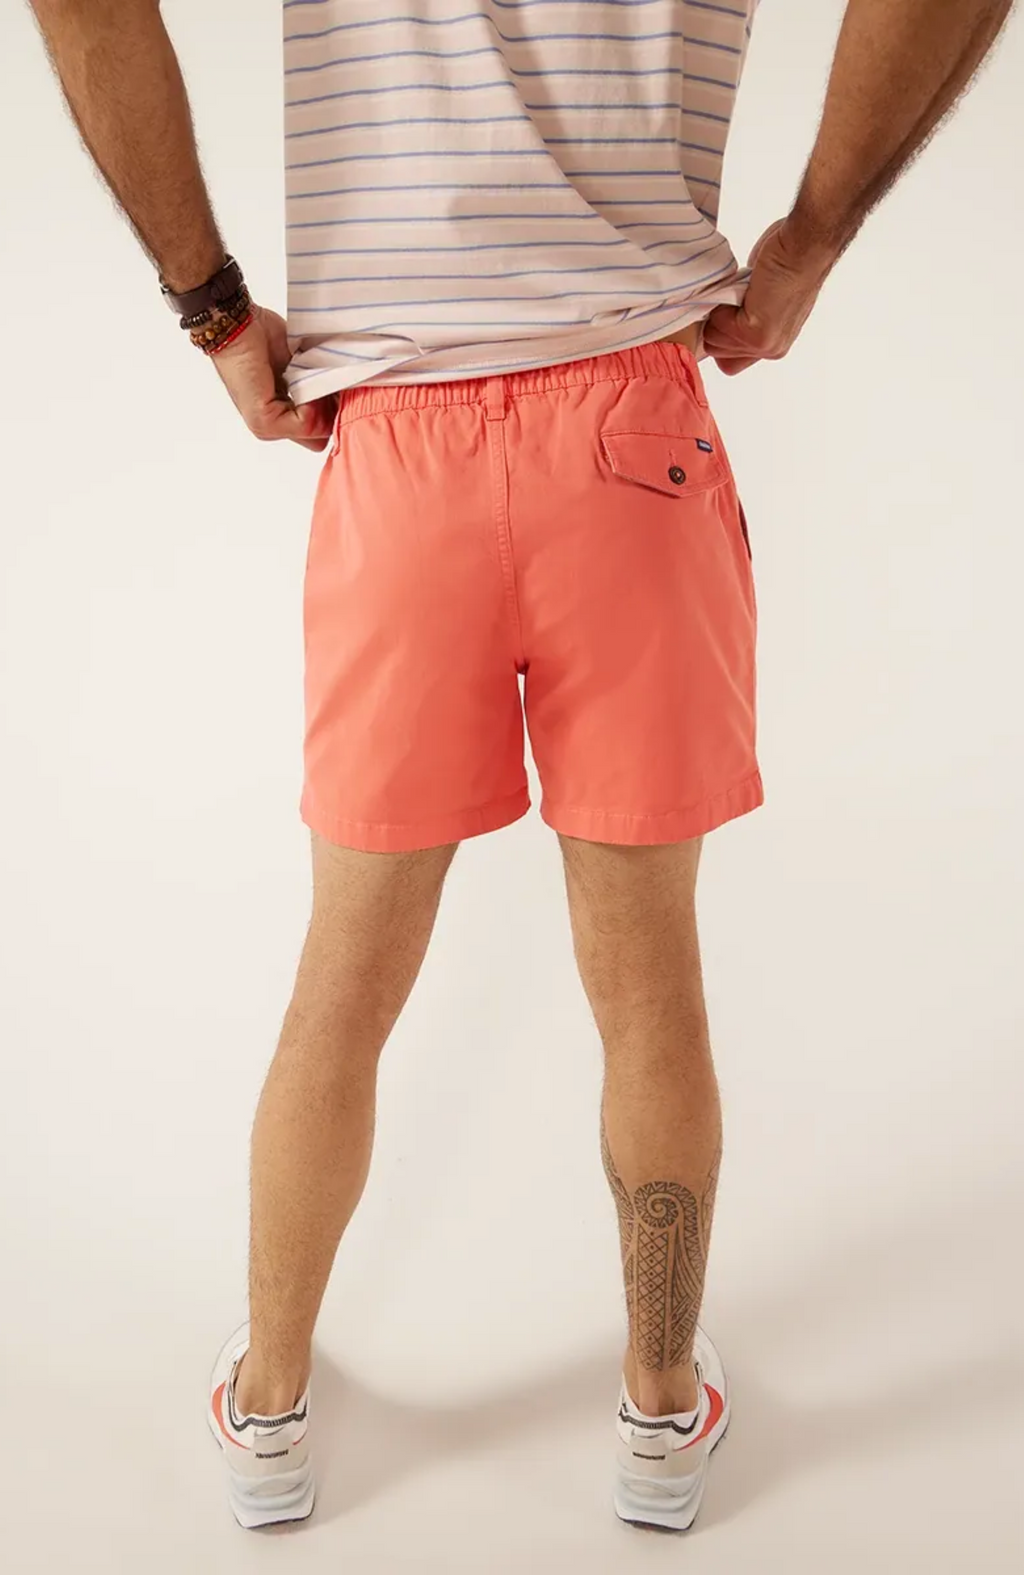 Chubbies - The New Englands 5.5"